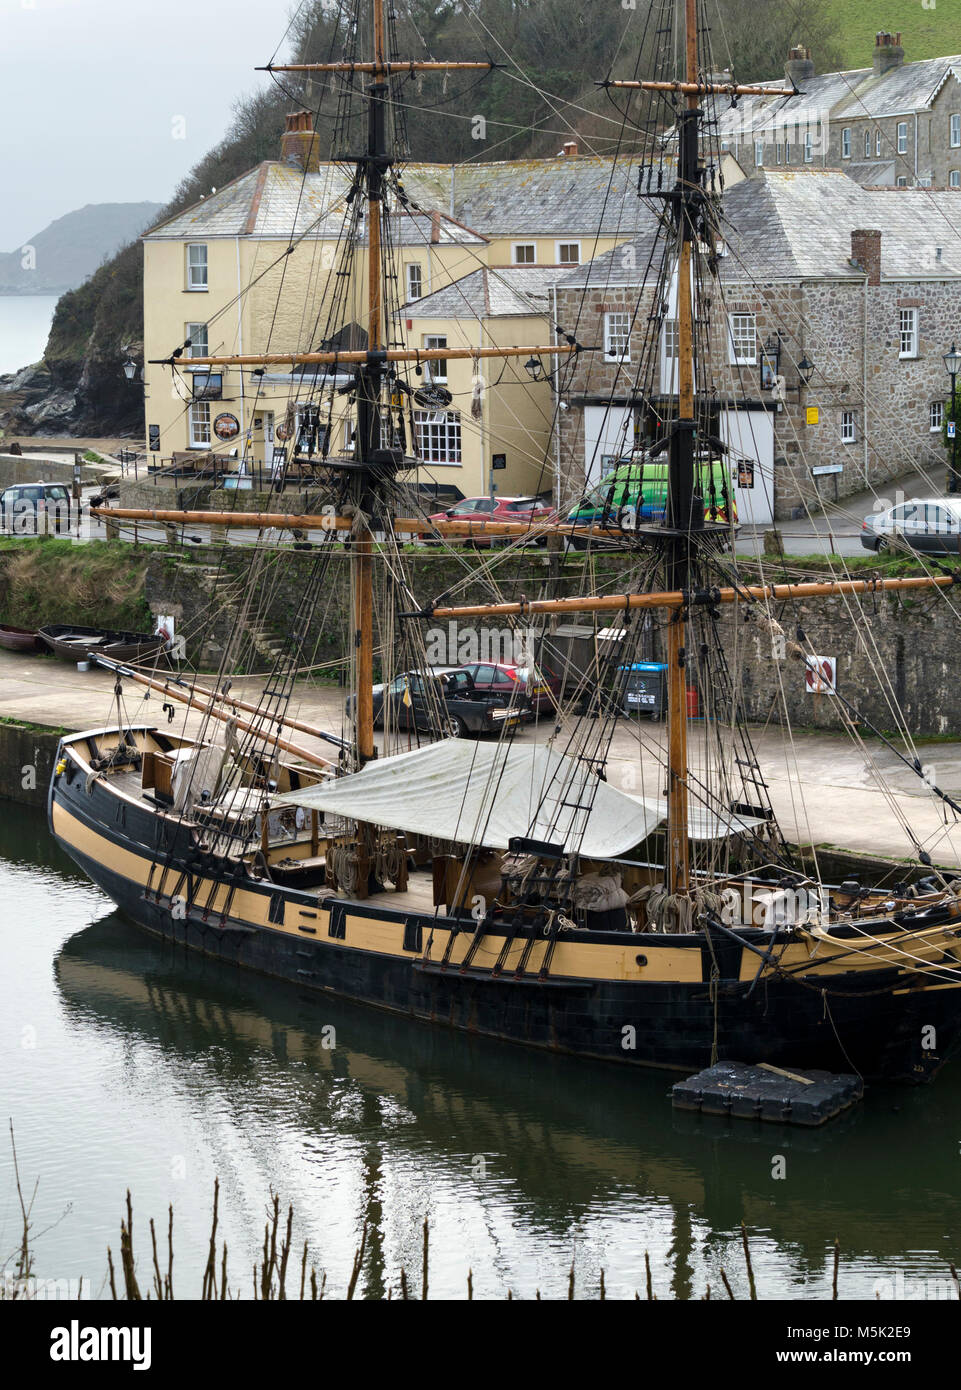 The Phoenix tall ship, wooden sailing ship moored in Charlestown Harbour, Cornwall, England. Charlestown was used as a location for filming Poldark. Stock Photo